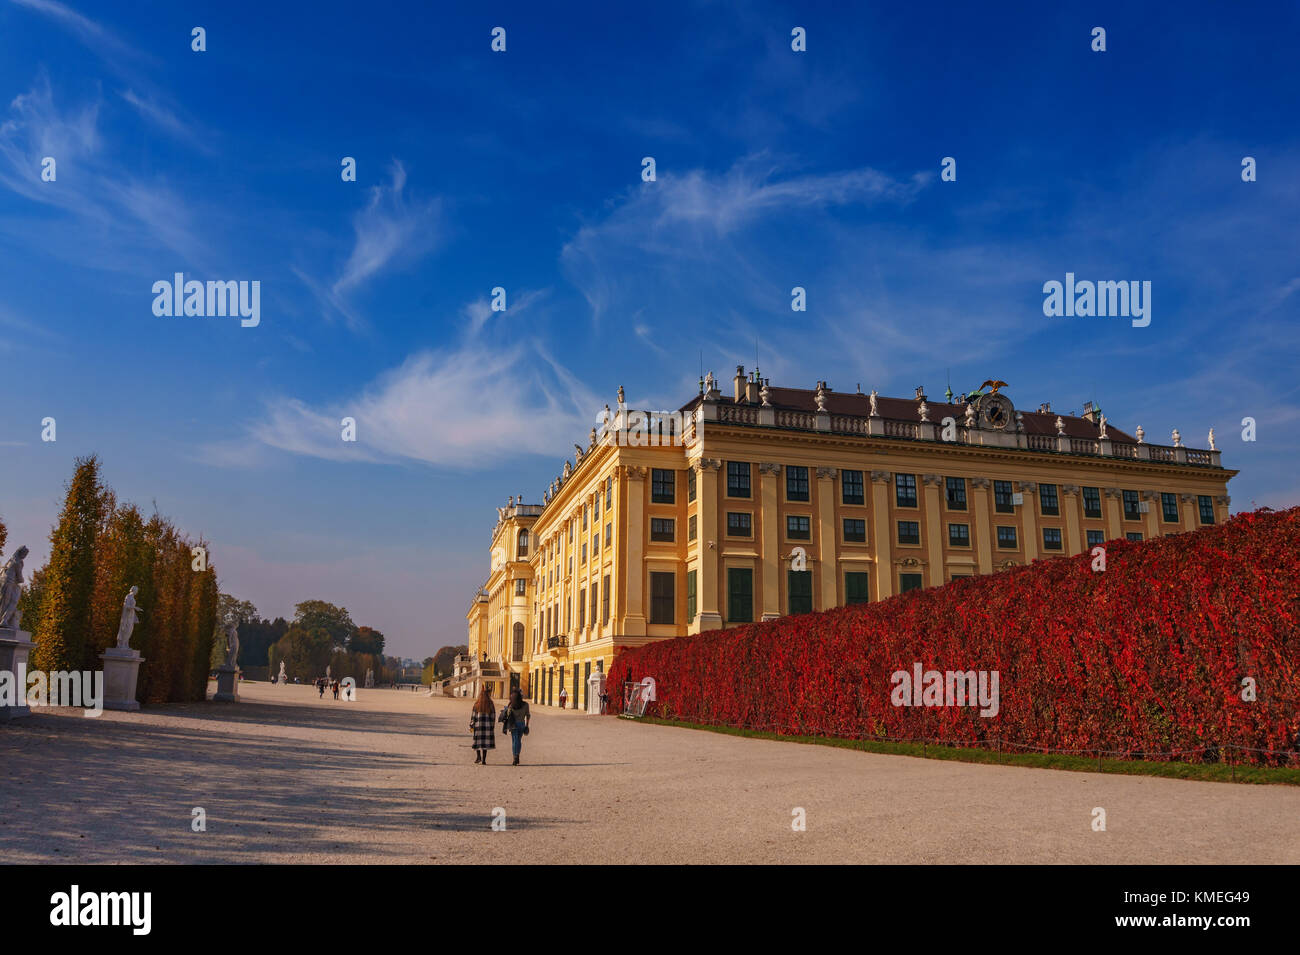 The famous Schonbrunn Palace Vienna in Austria, Europe. Stock Photo